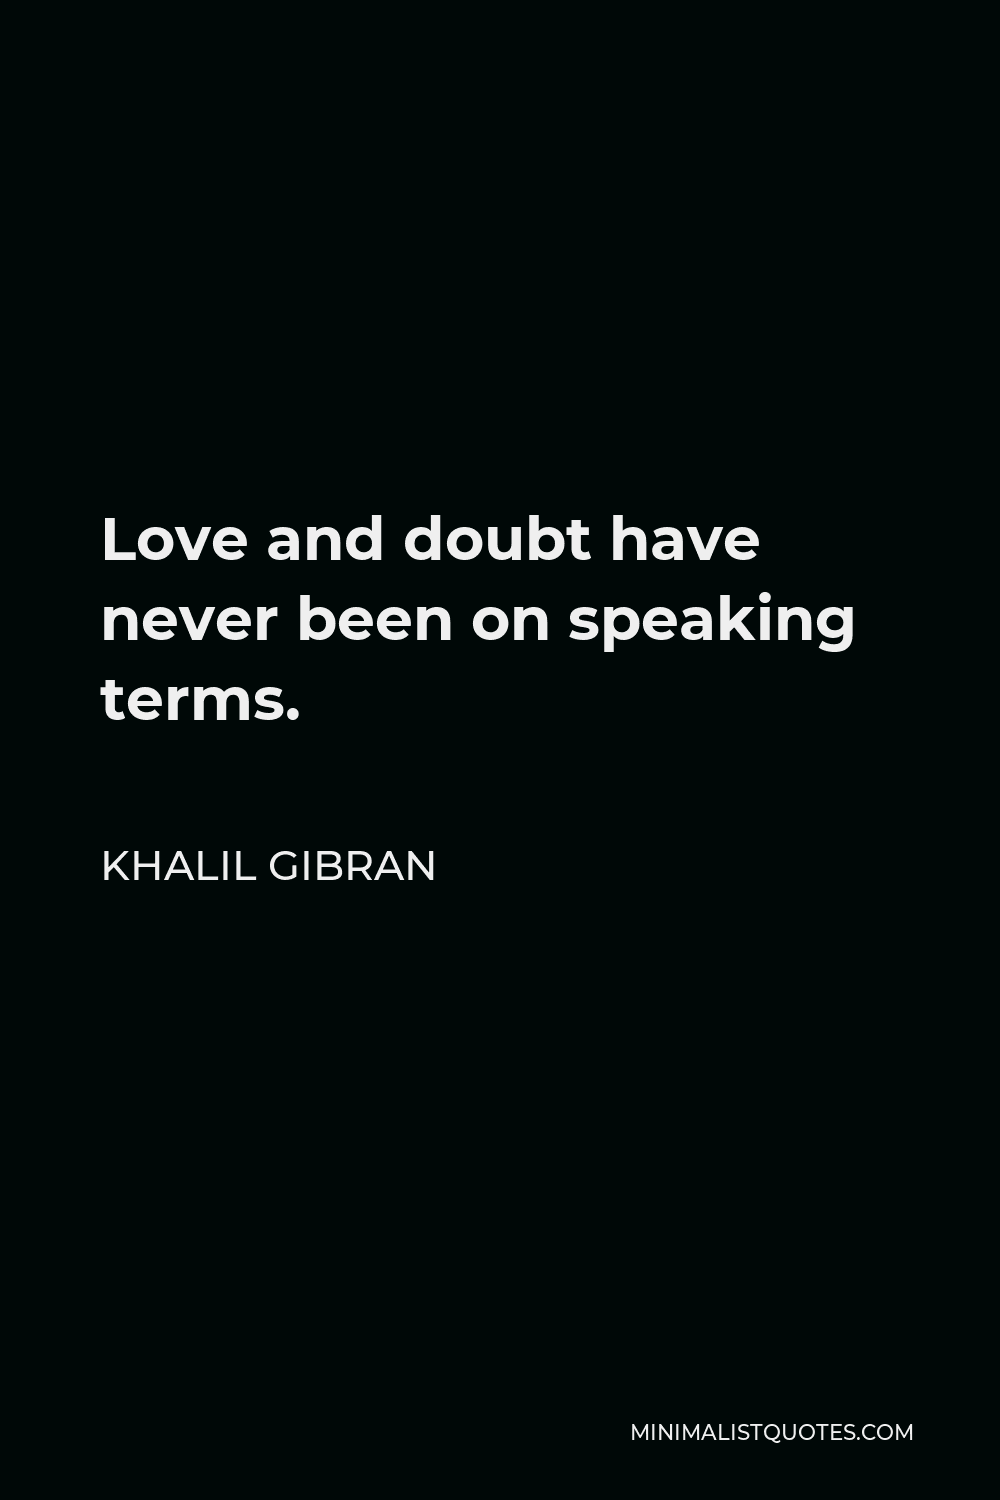 Khalil Gibran Quote Between What Is Said And Not Meant And What Is Meant And Not Said Most Of 